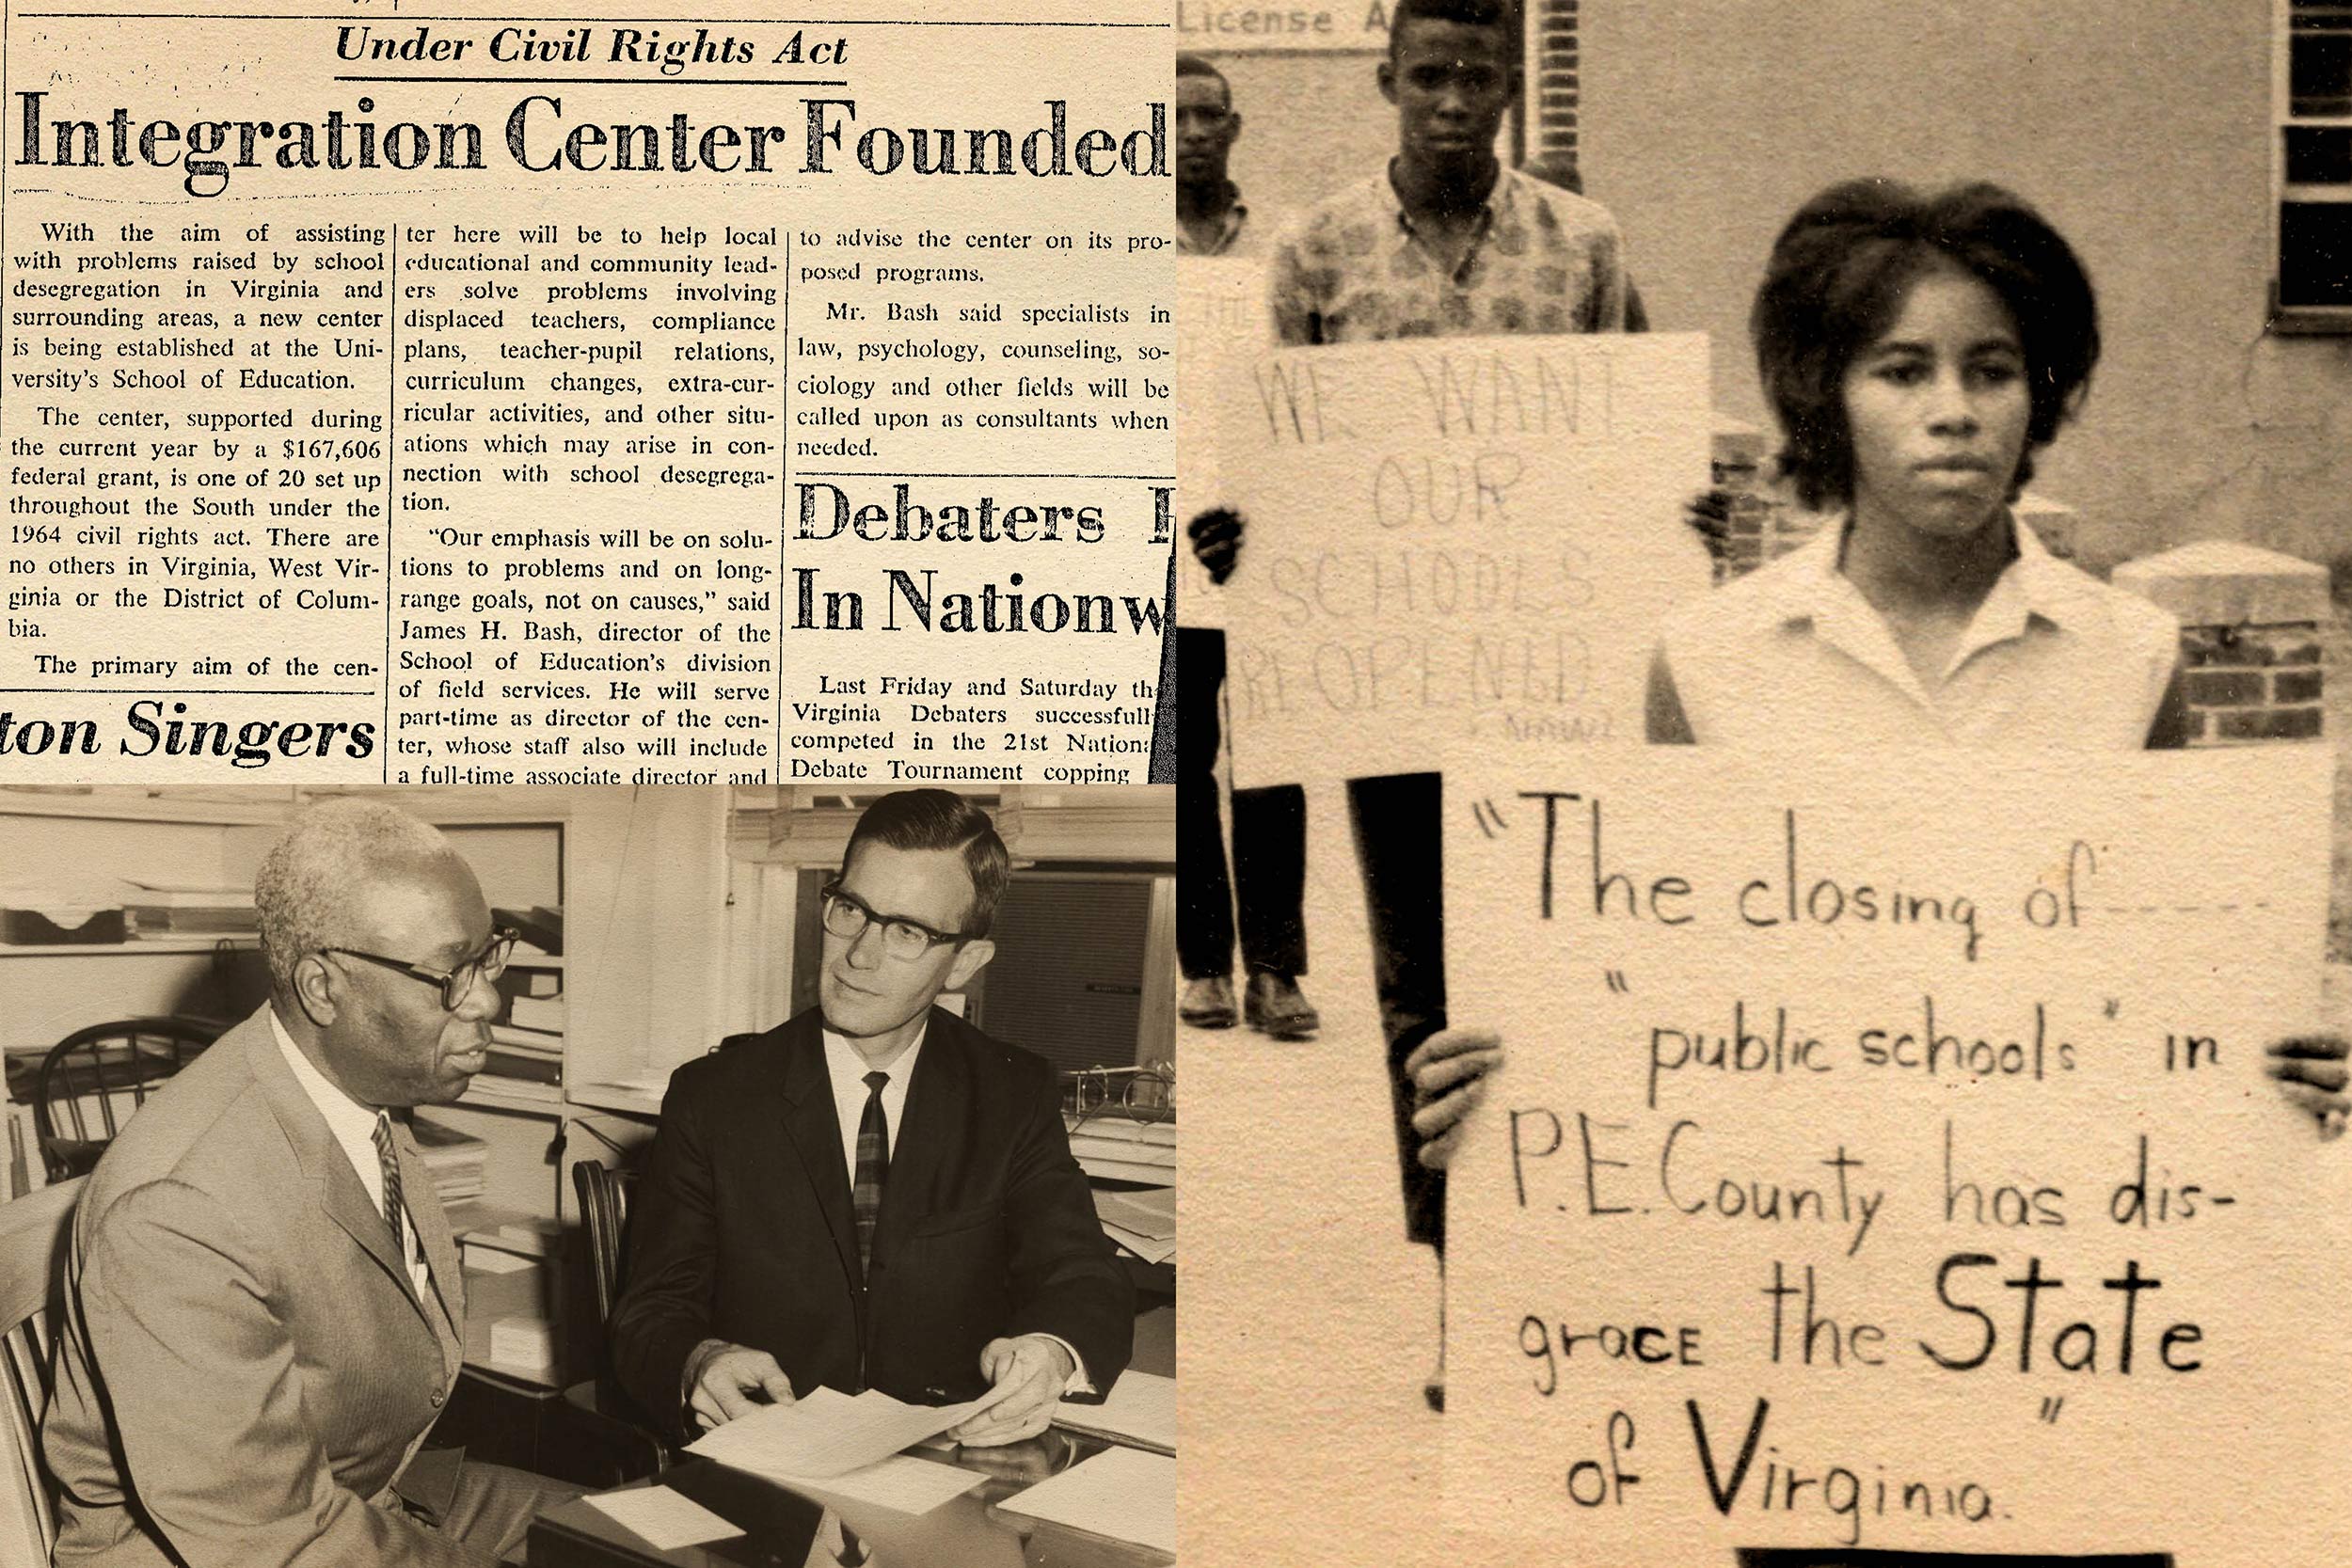 Top Left: News clipping with the headline integration center founded, bottom left: two men sitting at a desk looking at a handwritten letter, right: Men and women protesting carrying signs that say The closing of public schools in p.e. country has disgraced the state of Virginia and we want our schools reopened